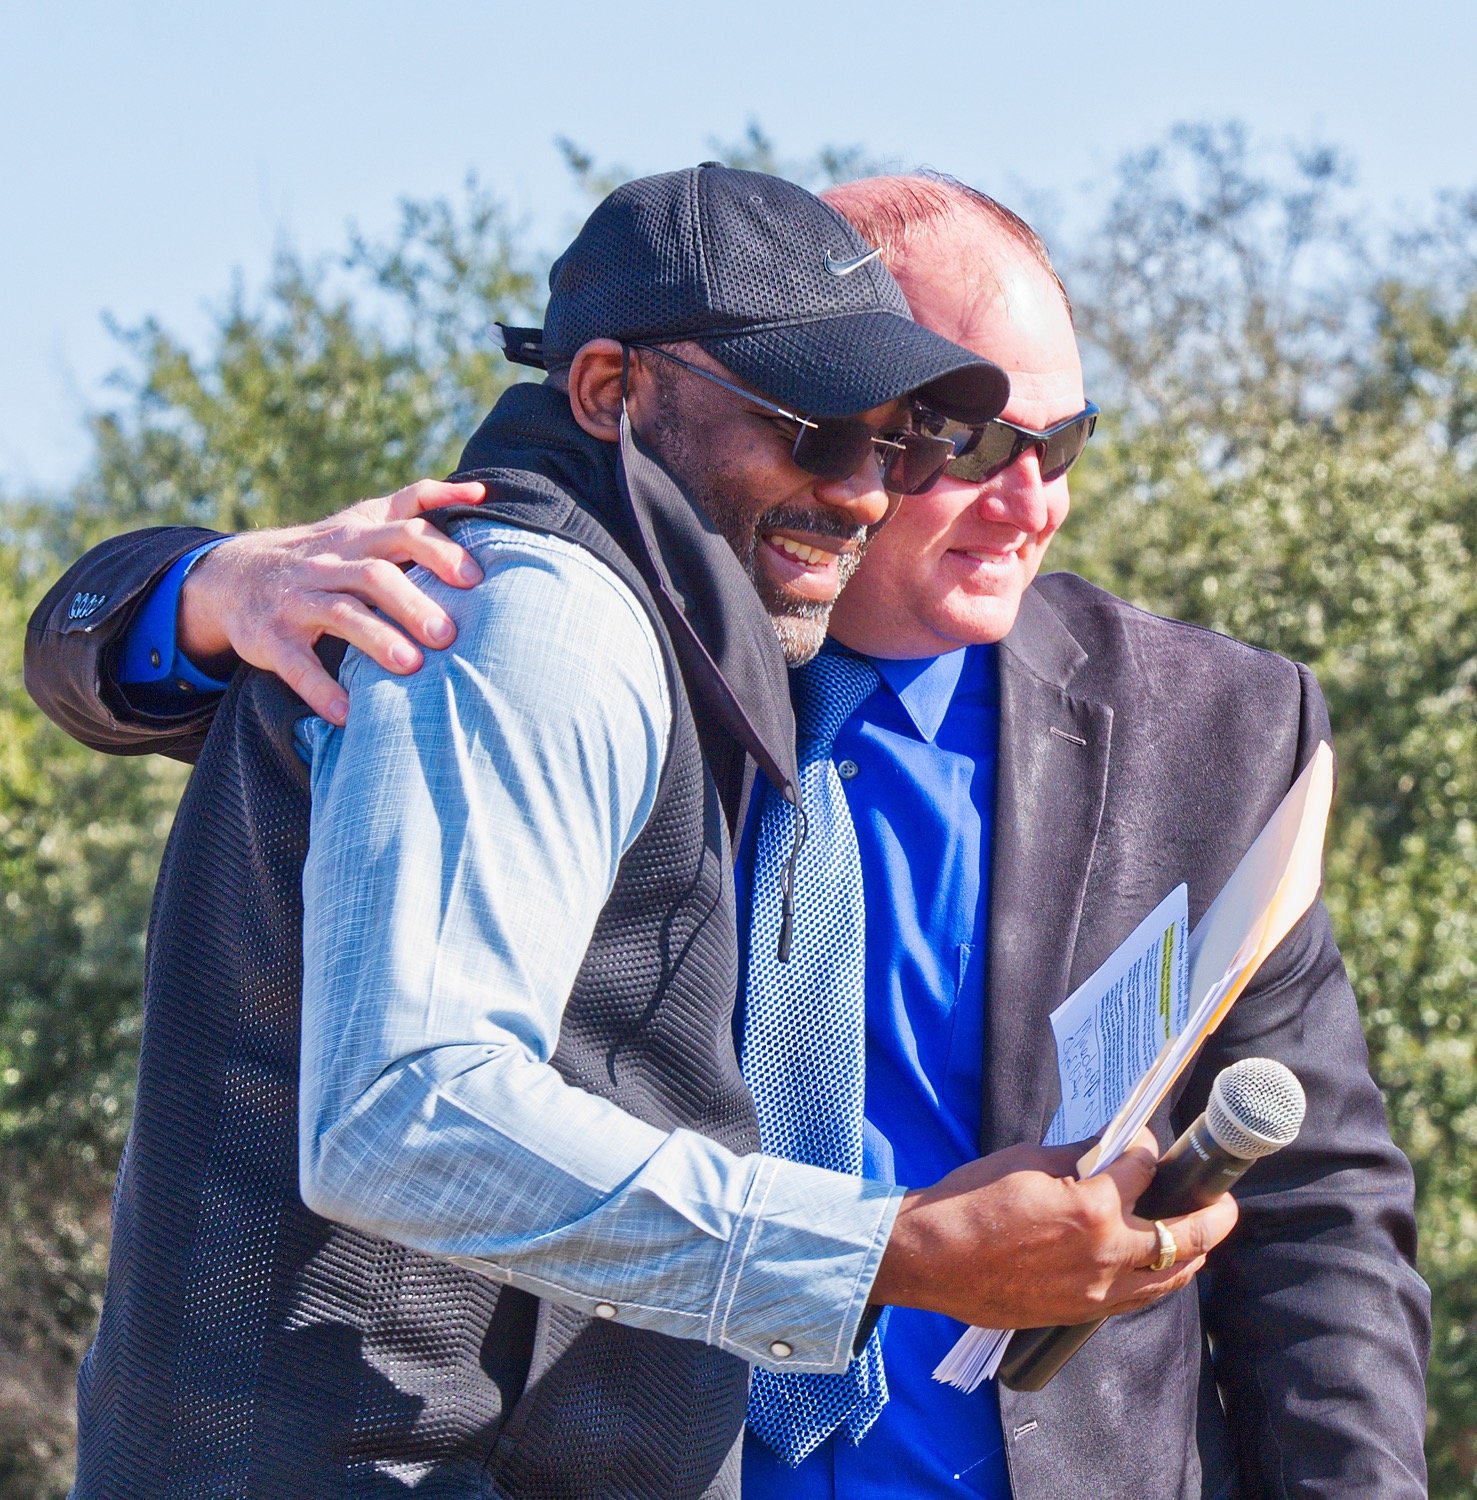 "Brothers from another mother," pastors Demethrius Boyd (left) and Michael Mize embrace after Mize's passionate words. [prints available]